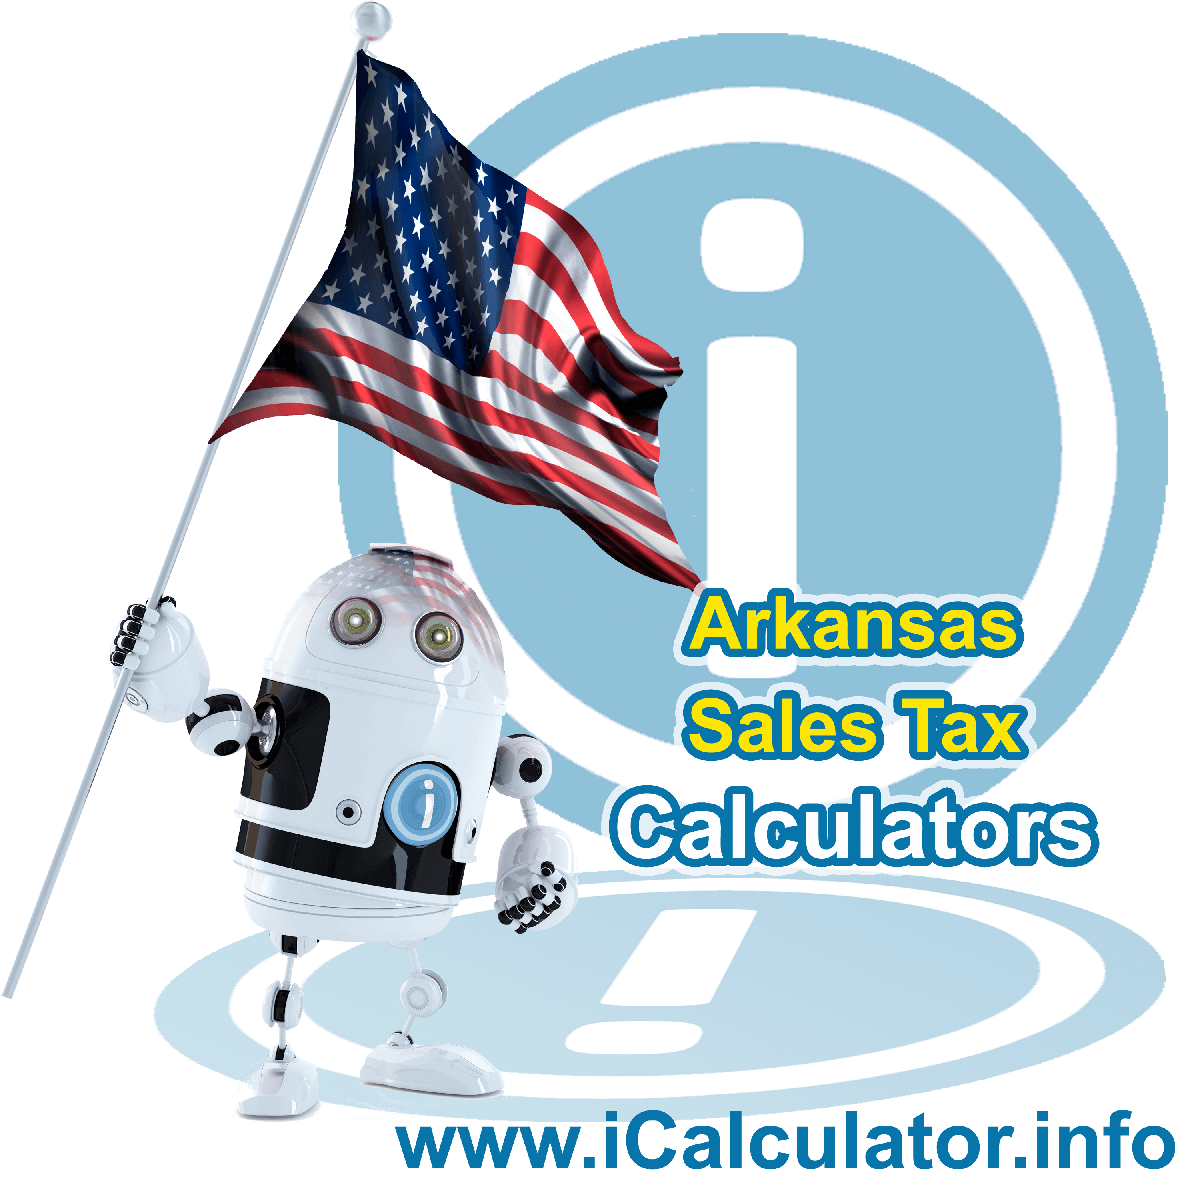 Lonsdale Sales Rates: This image illustrates a calculator robot calculating Lonsdale sales tax manually using the Lonsdale Sales Tax Formula. You can use this information to calculate Lonsdale Sales Tax manually or use the Lonsdale Sales Tax Calculator to calculate sales tax online.